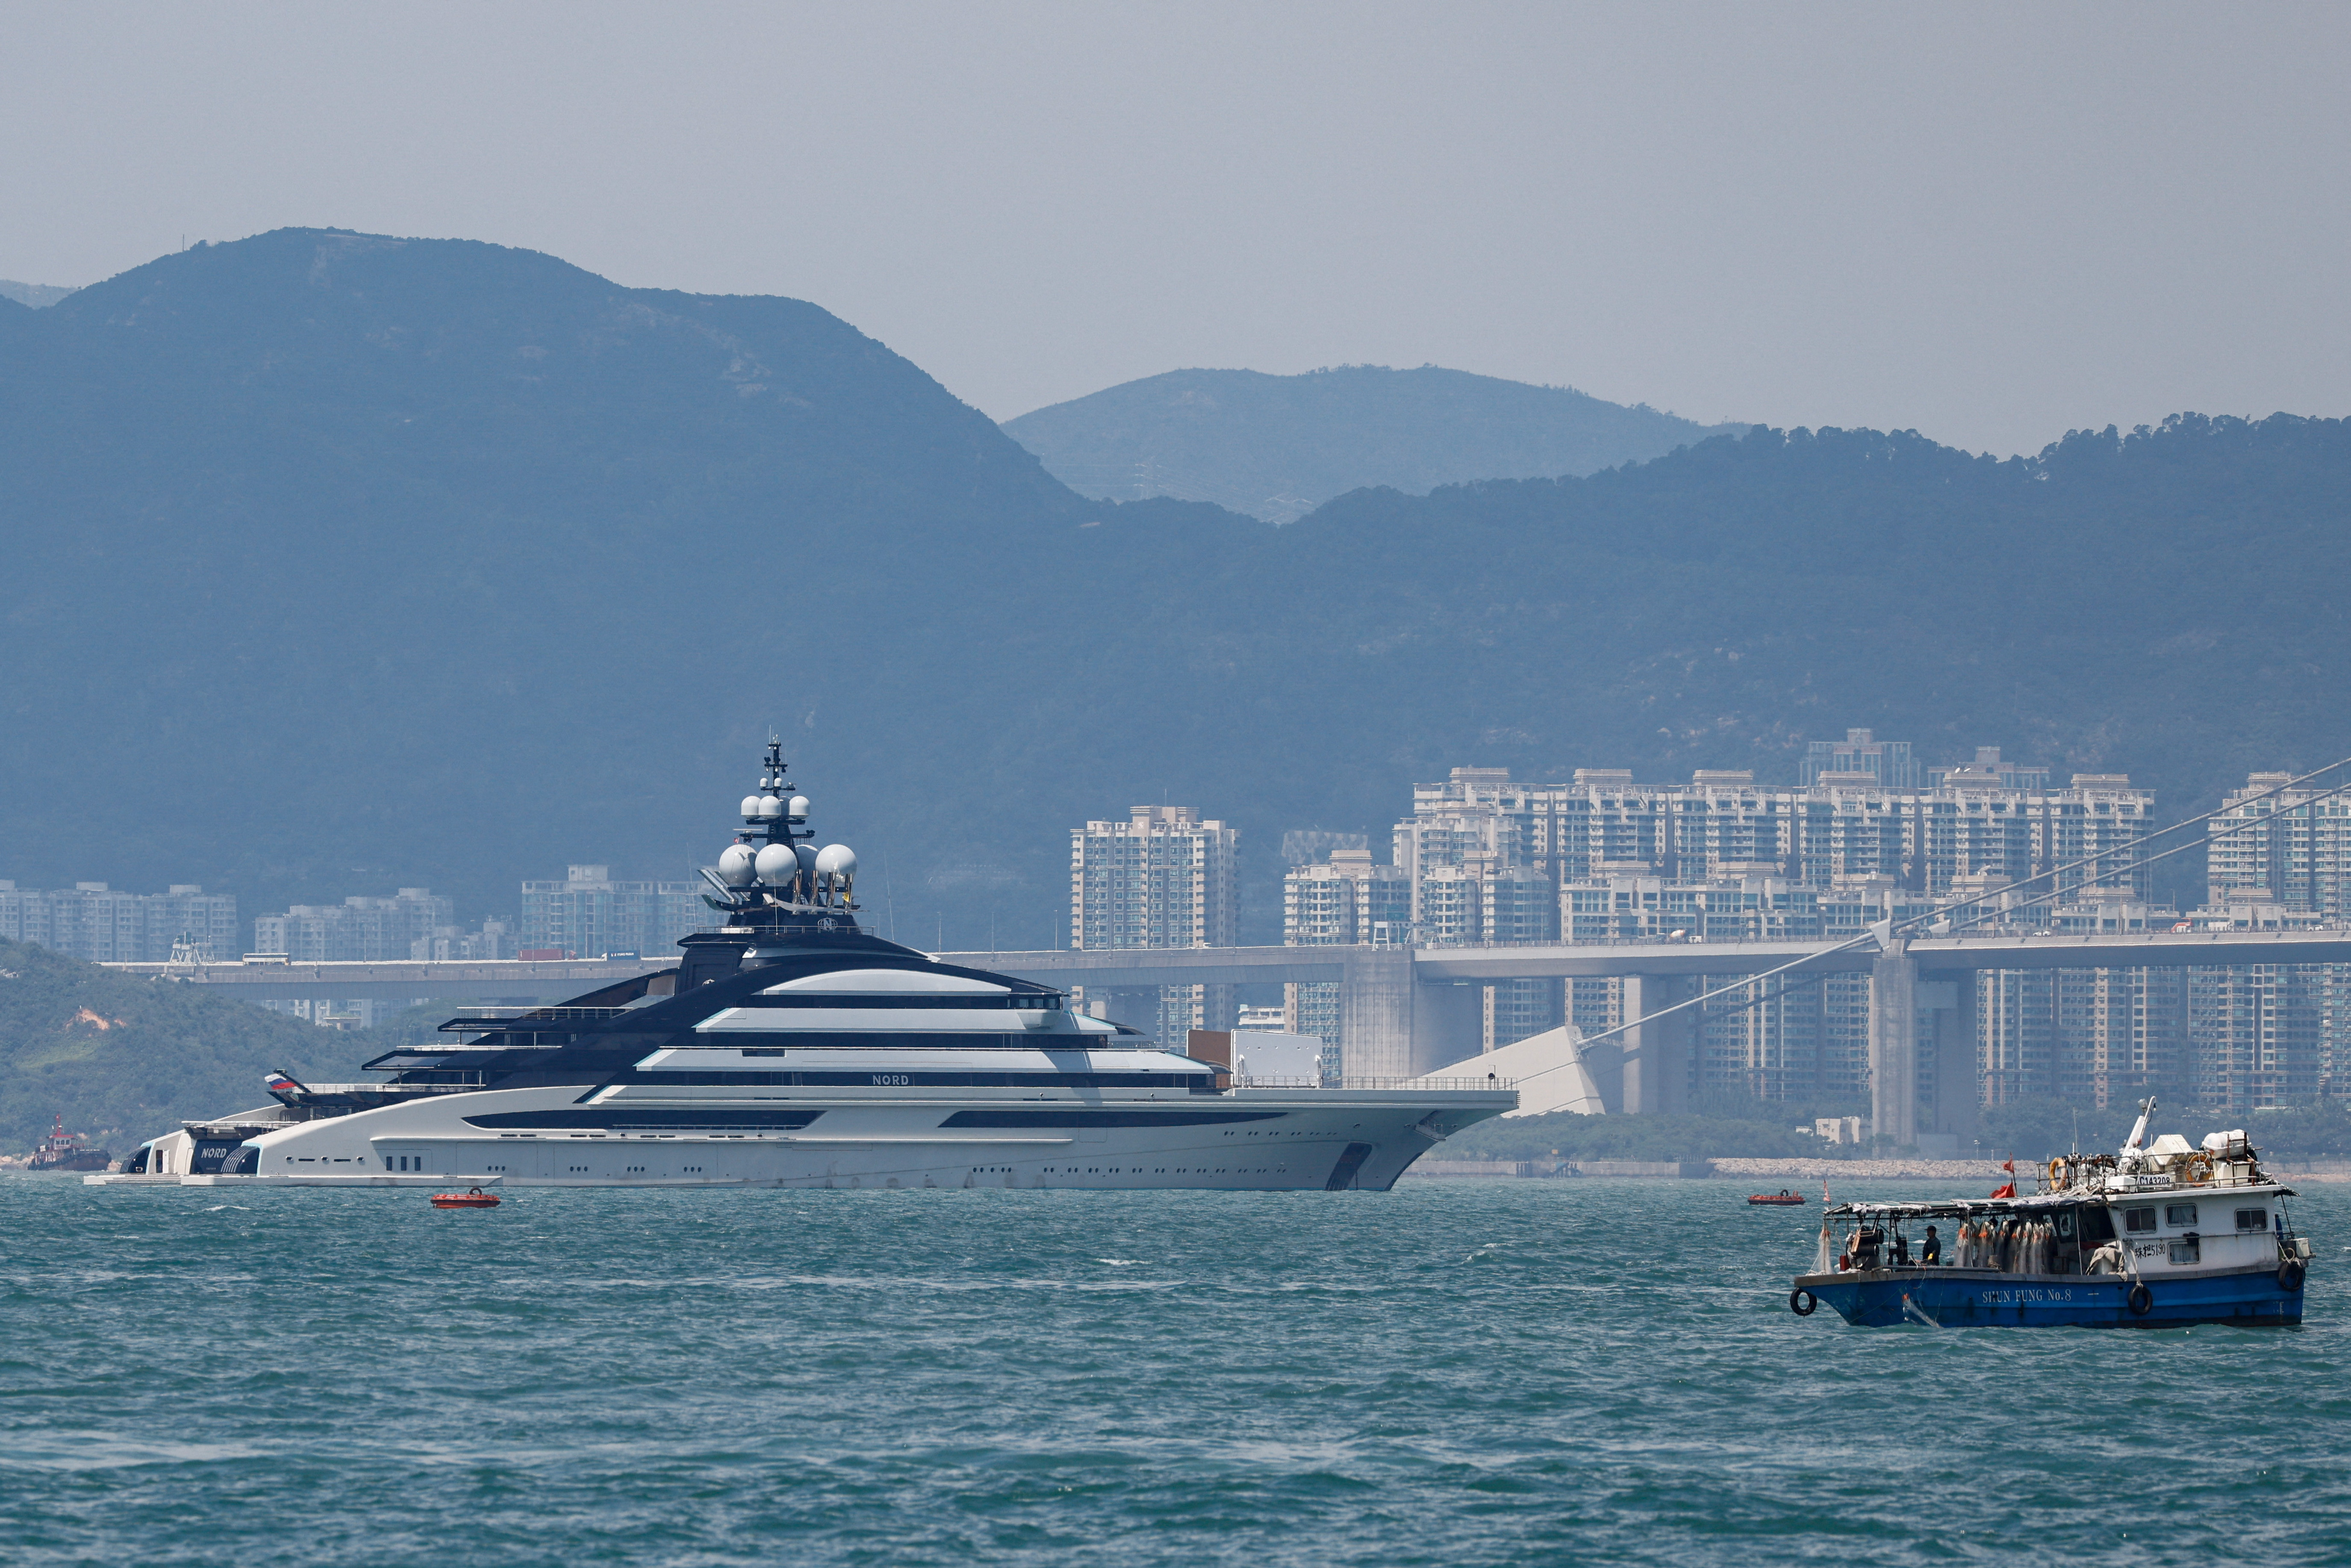 The 465-foot superyacht "Nord", reportedly owned by the sanctioned Russian oligarch Alexei Mordashov is seen, in Hong Kong